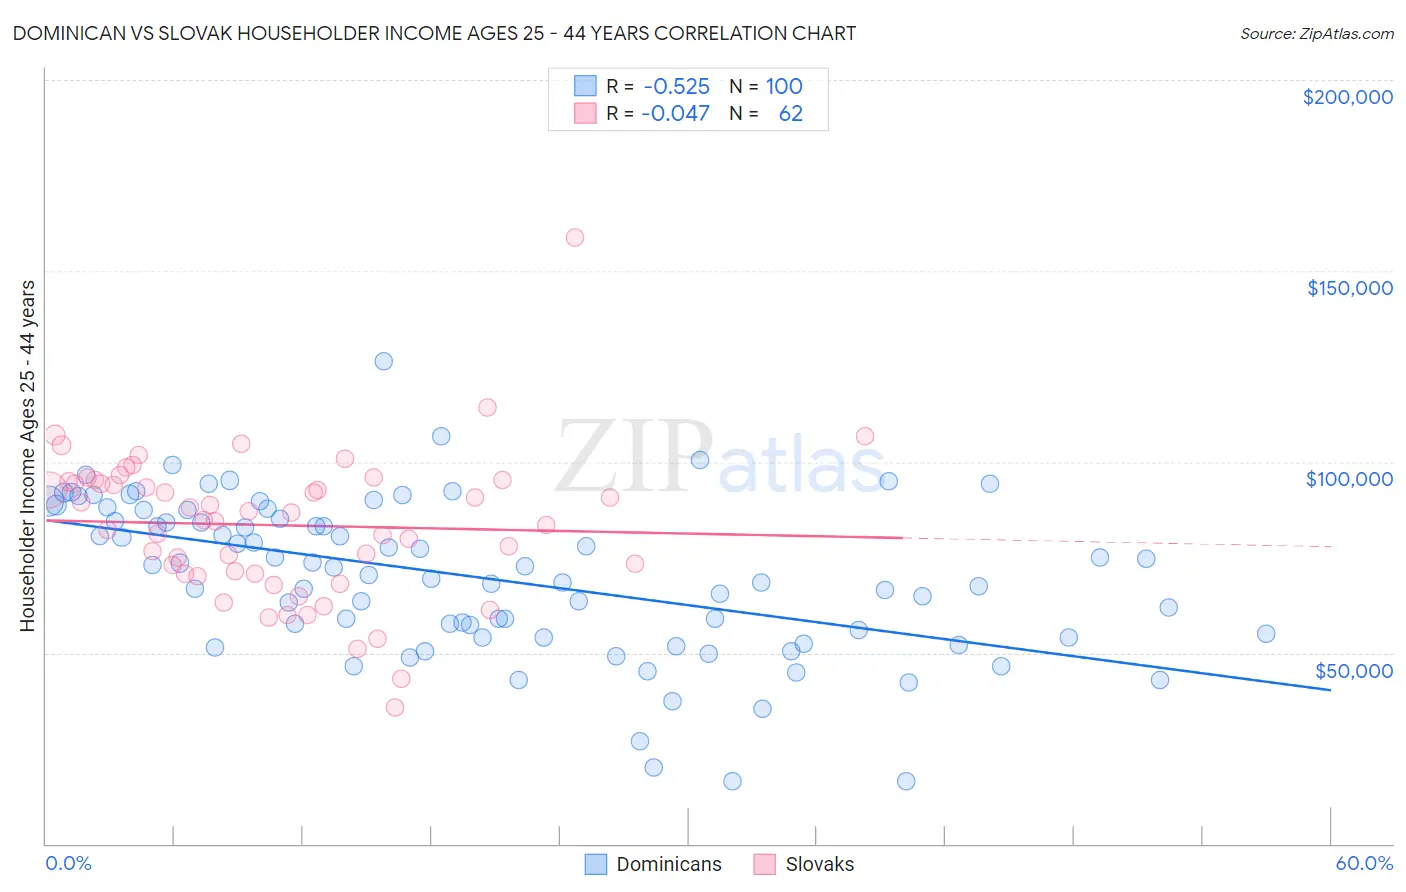 Dominican vs Slovak Householder Income Ages 25 - 44 years